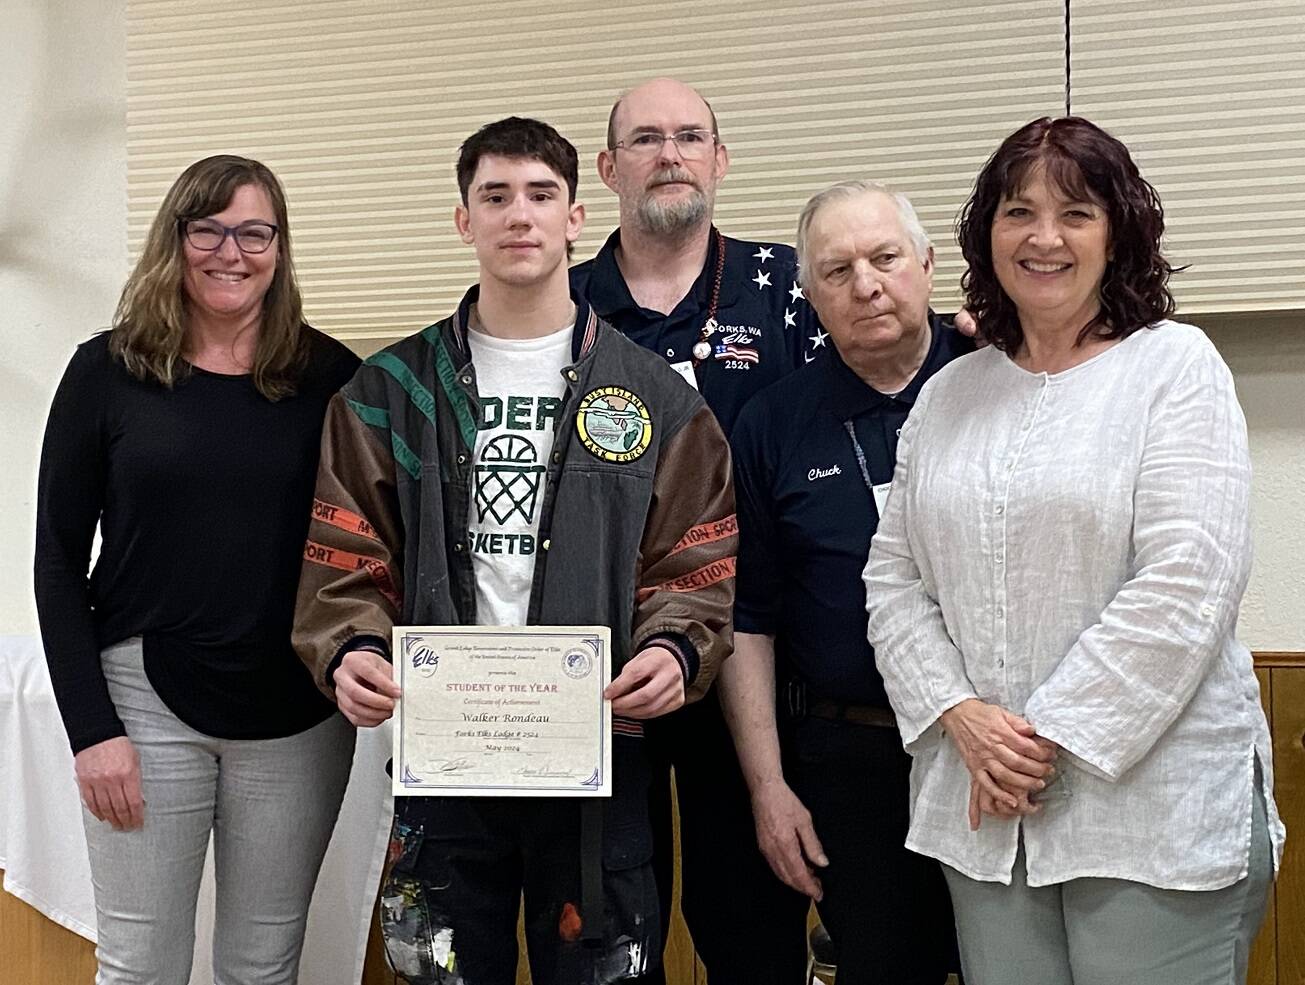 Walker Rondeau and Janessa Ramos were named students of the year. Pictured are FHS Principal Brenda King, Walker, Elks members ER Darel Maxfield, and Chuck Jennings, and FHS Registrar Deanna Shaw. Janessa is not pictured. Submitted Photos